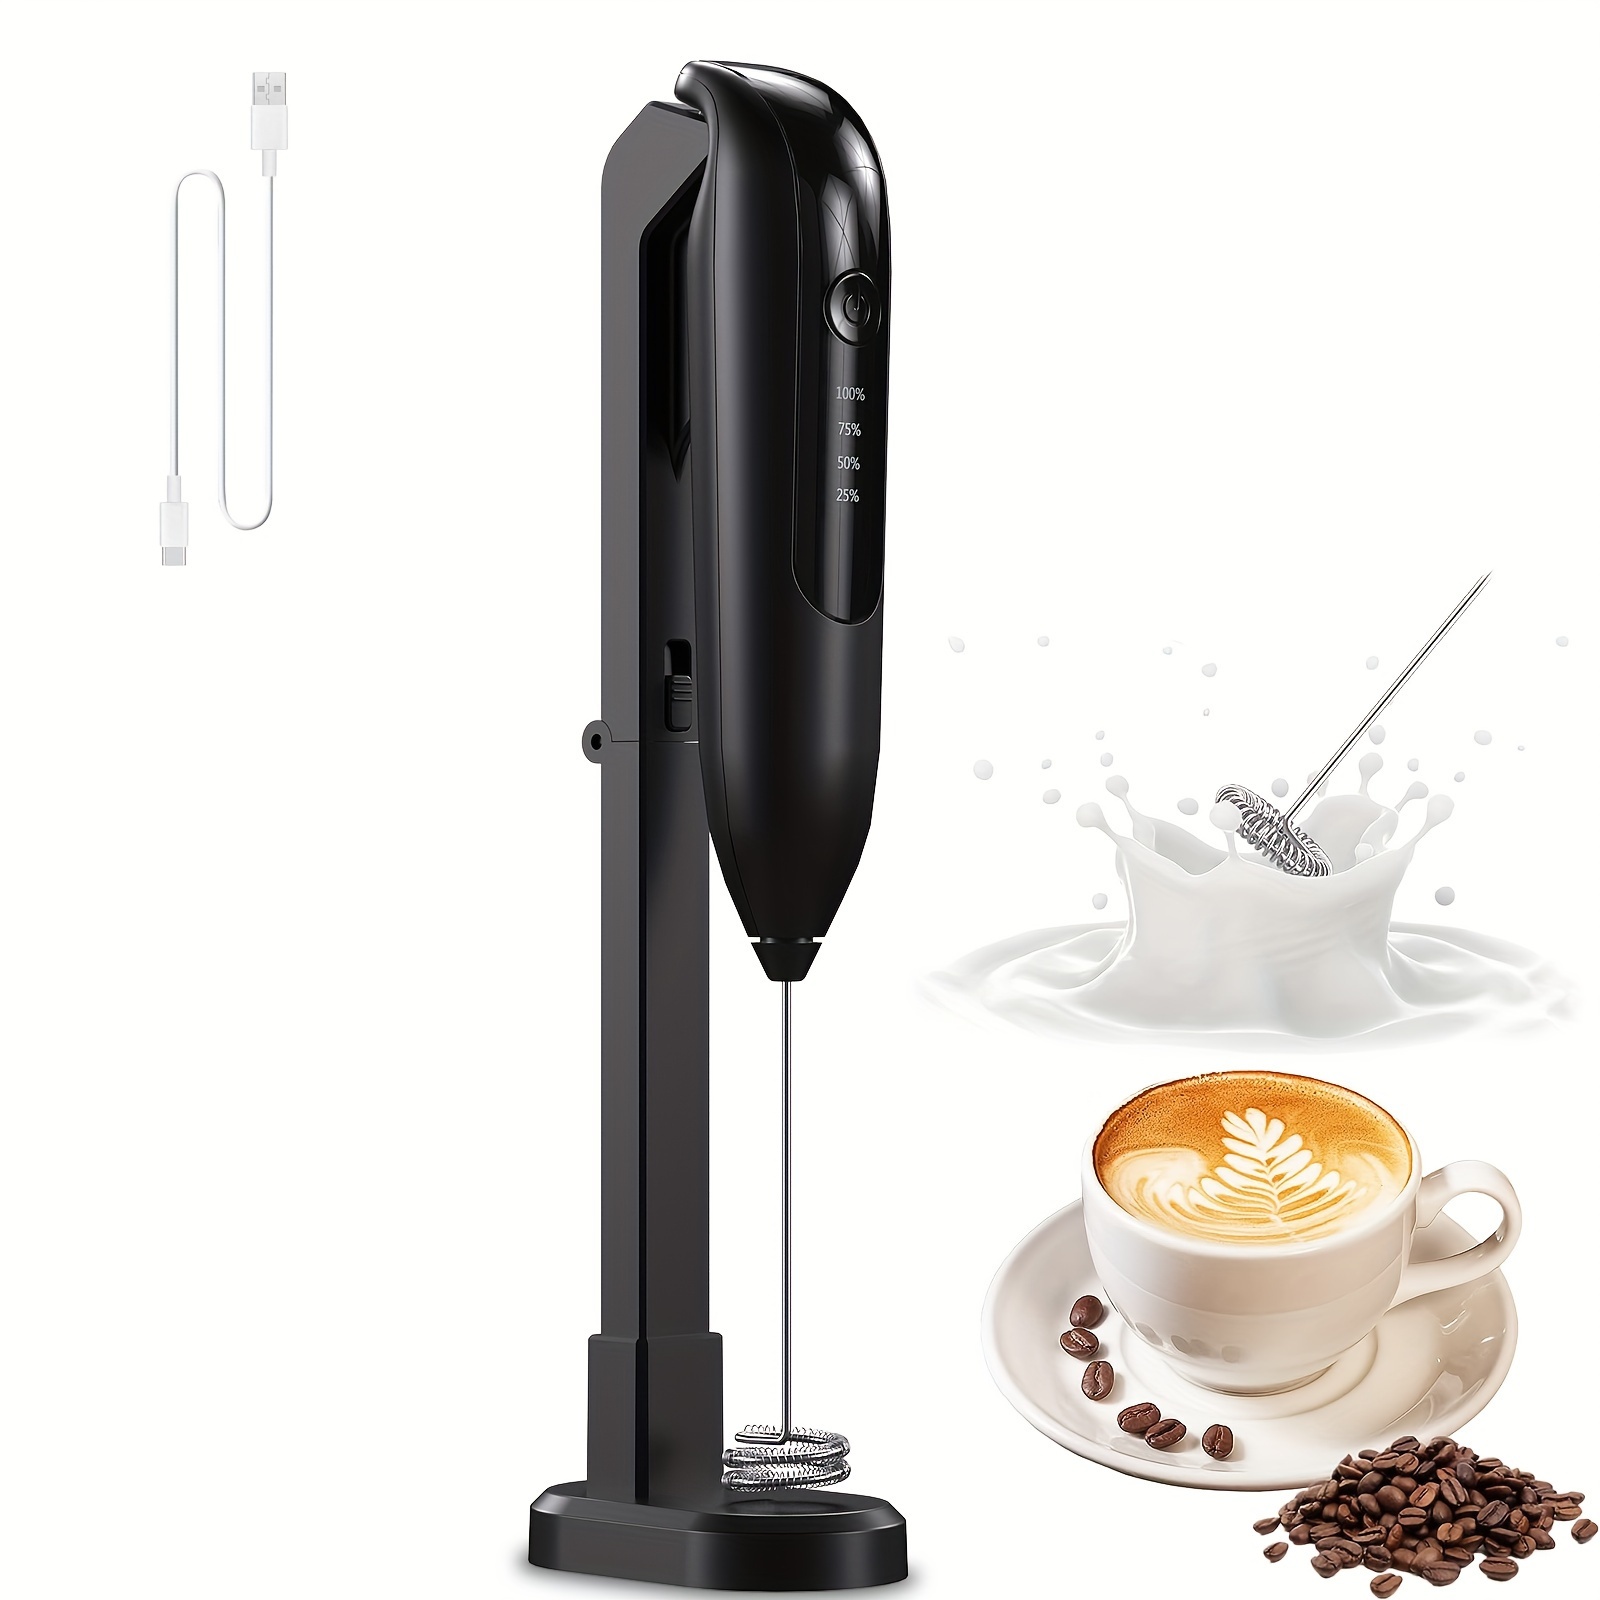 Fleaks Funly Milk Frother for Coffee, Handheld Frother Electric Whisk, Milk Foamer and Coffee Blender for Latte, Matcha, Cappuccino, Hot Choc